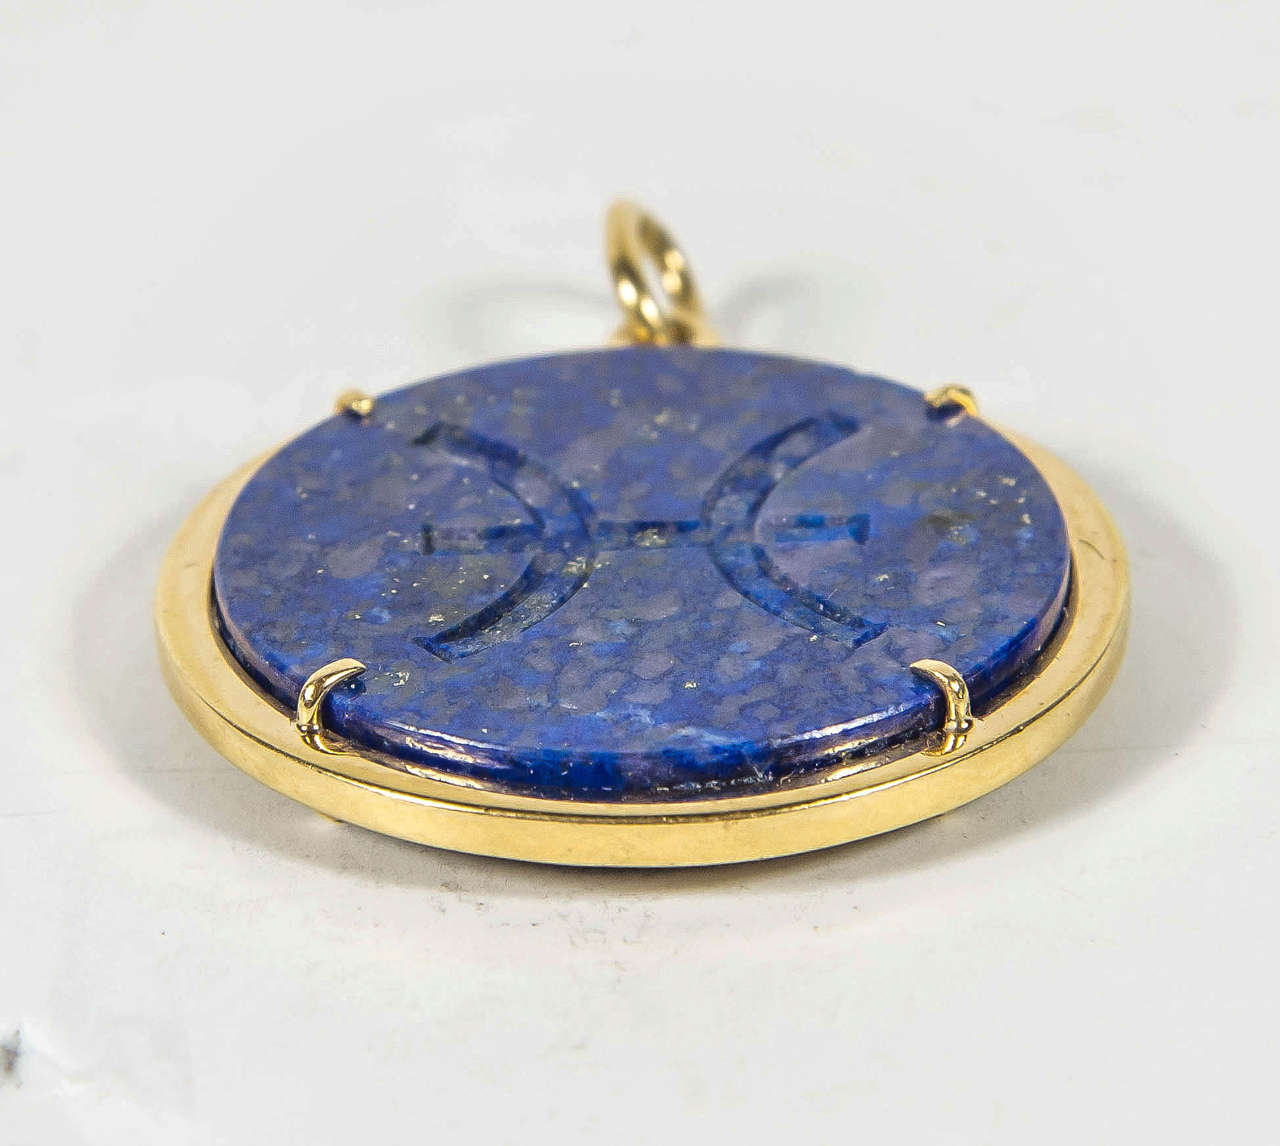 This charm is signed by Aldo Cipullo made of hand carved Lapis with the Pisces zodiac symbol carved into it.This piece is framed in 18k yellow gold and would be great as a pendant or on a charm bracelet.